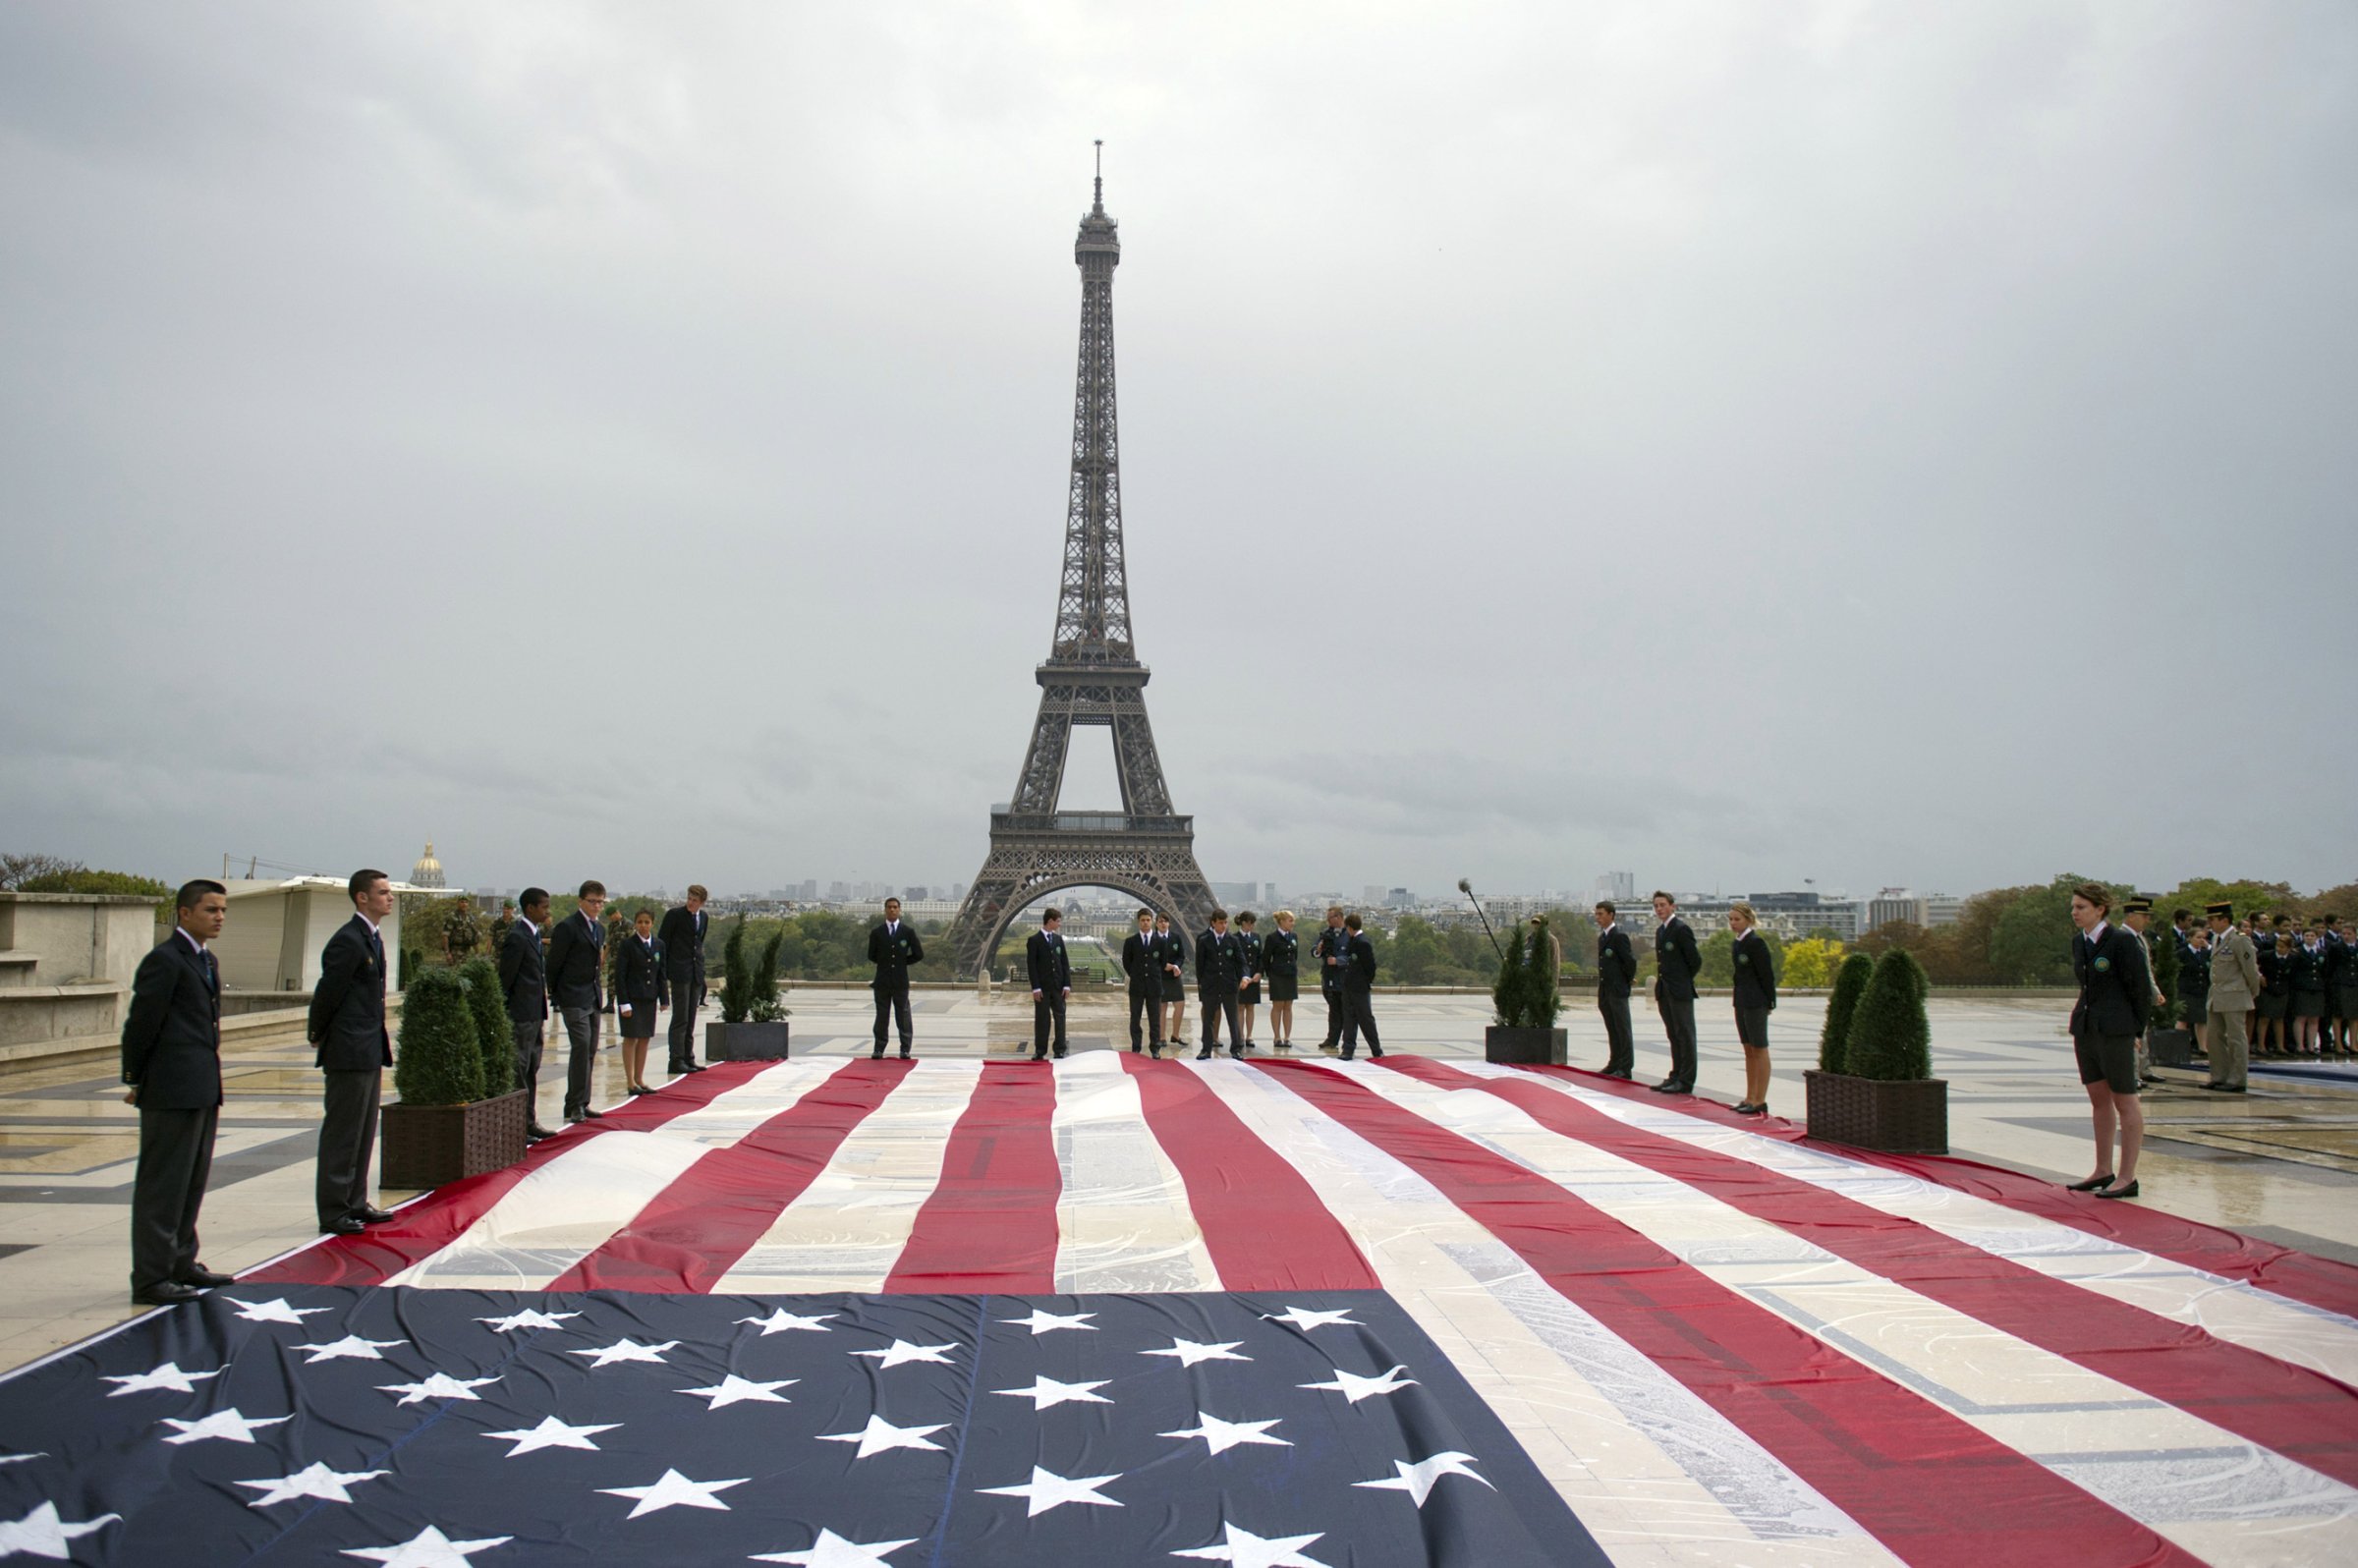 Student officers display an American flag on the Trocadero square with the Eiffel tower in the background during a solemn tribute to the victims of the 9/11 attacks on Sept. 11, 2011 in Paris.